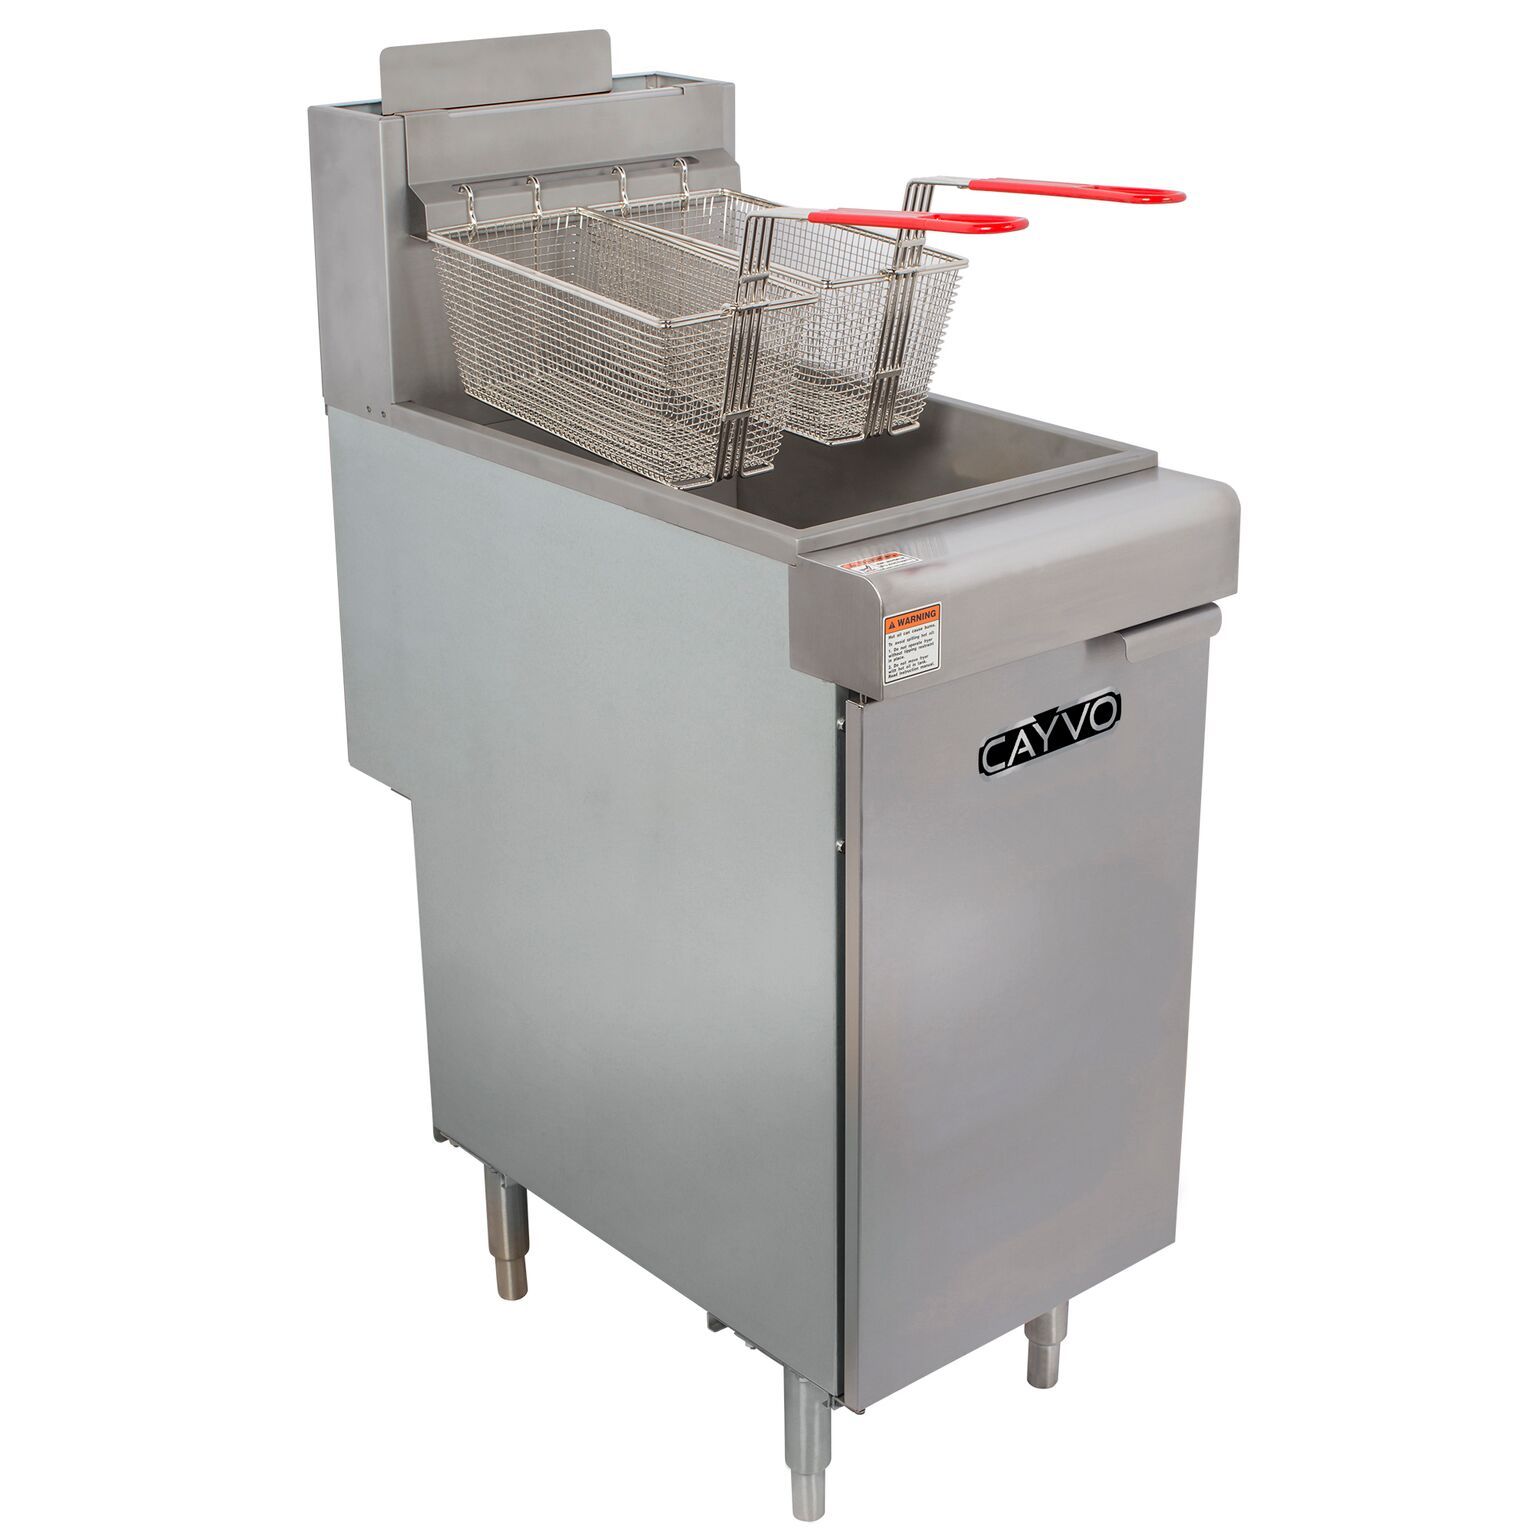 Egles 4 Tube Commercial Deep Fryer with 2 Baskets - 55 lbs